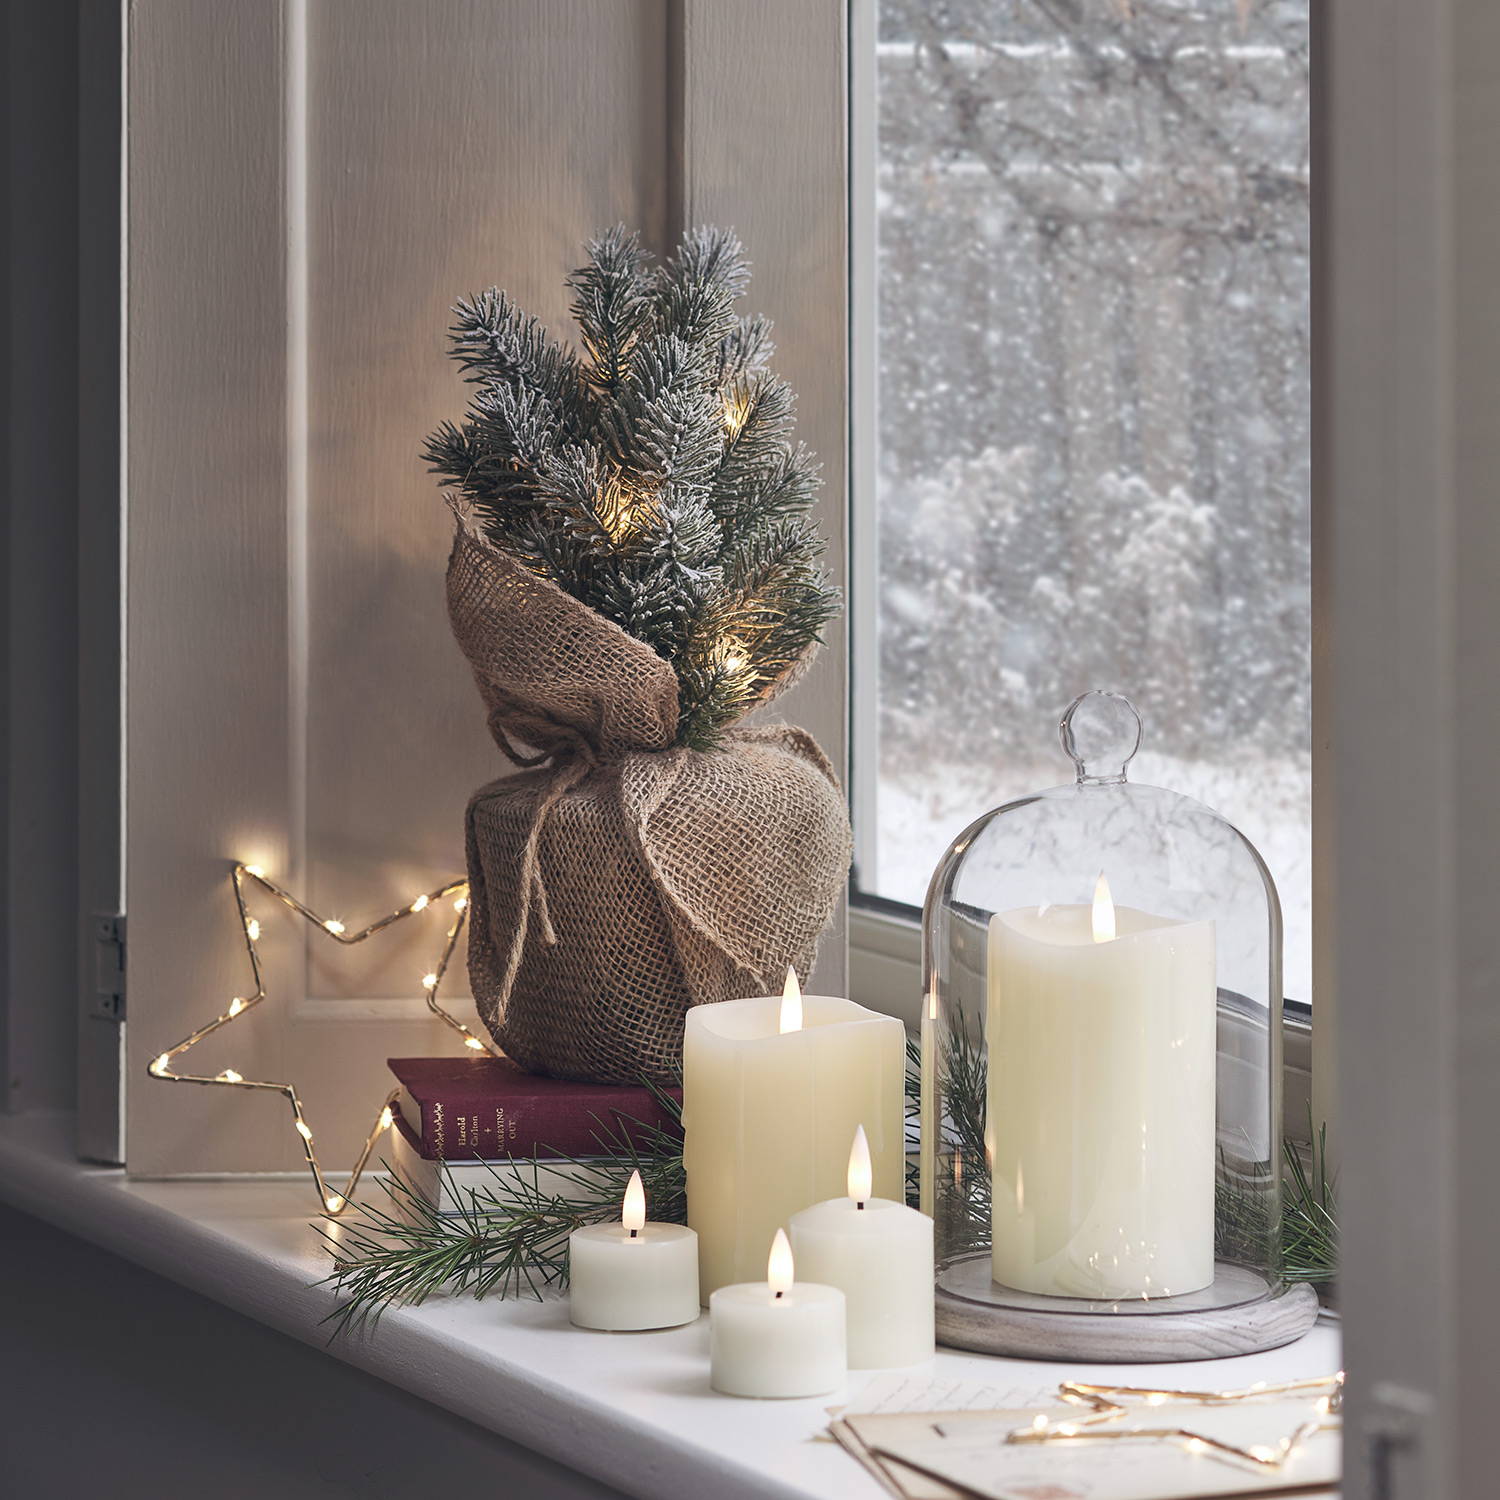 A snowy window image with indoor LED candles, a star light and mini Christmas tree.